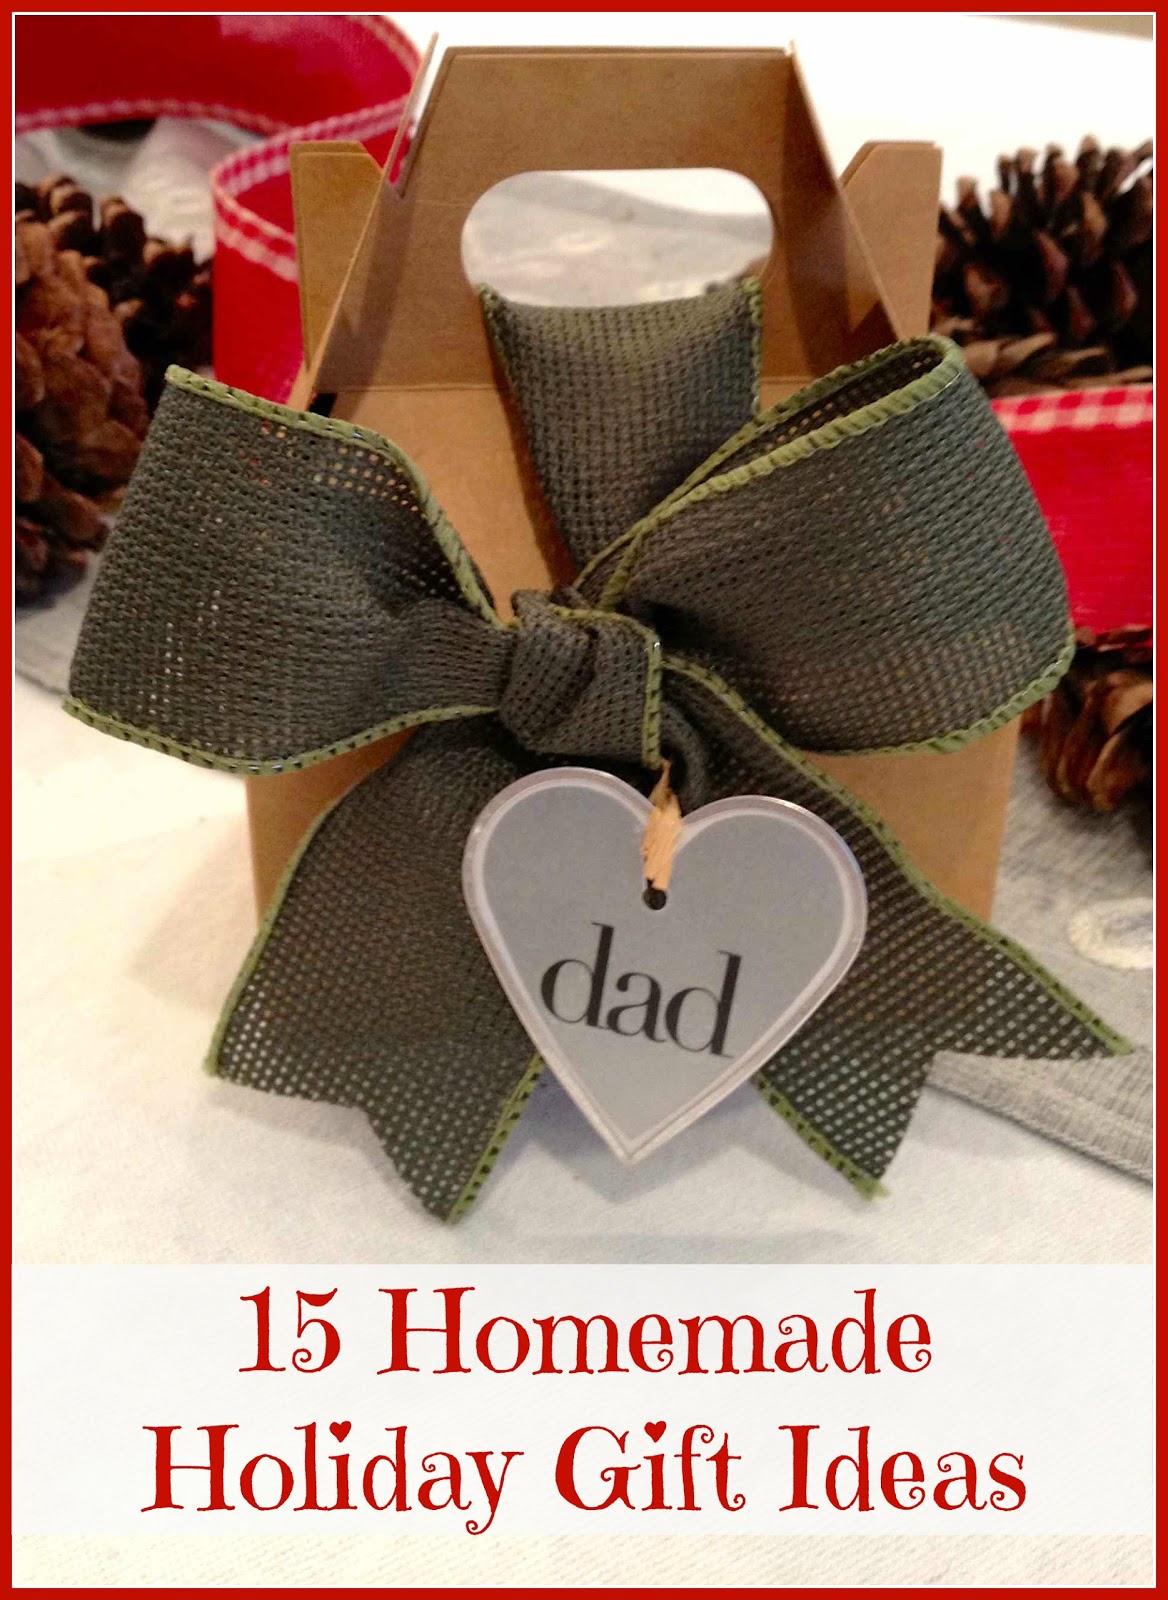 Homemade Christmas Gifts Ideas You'll Love